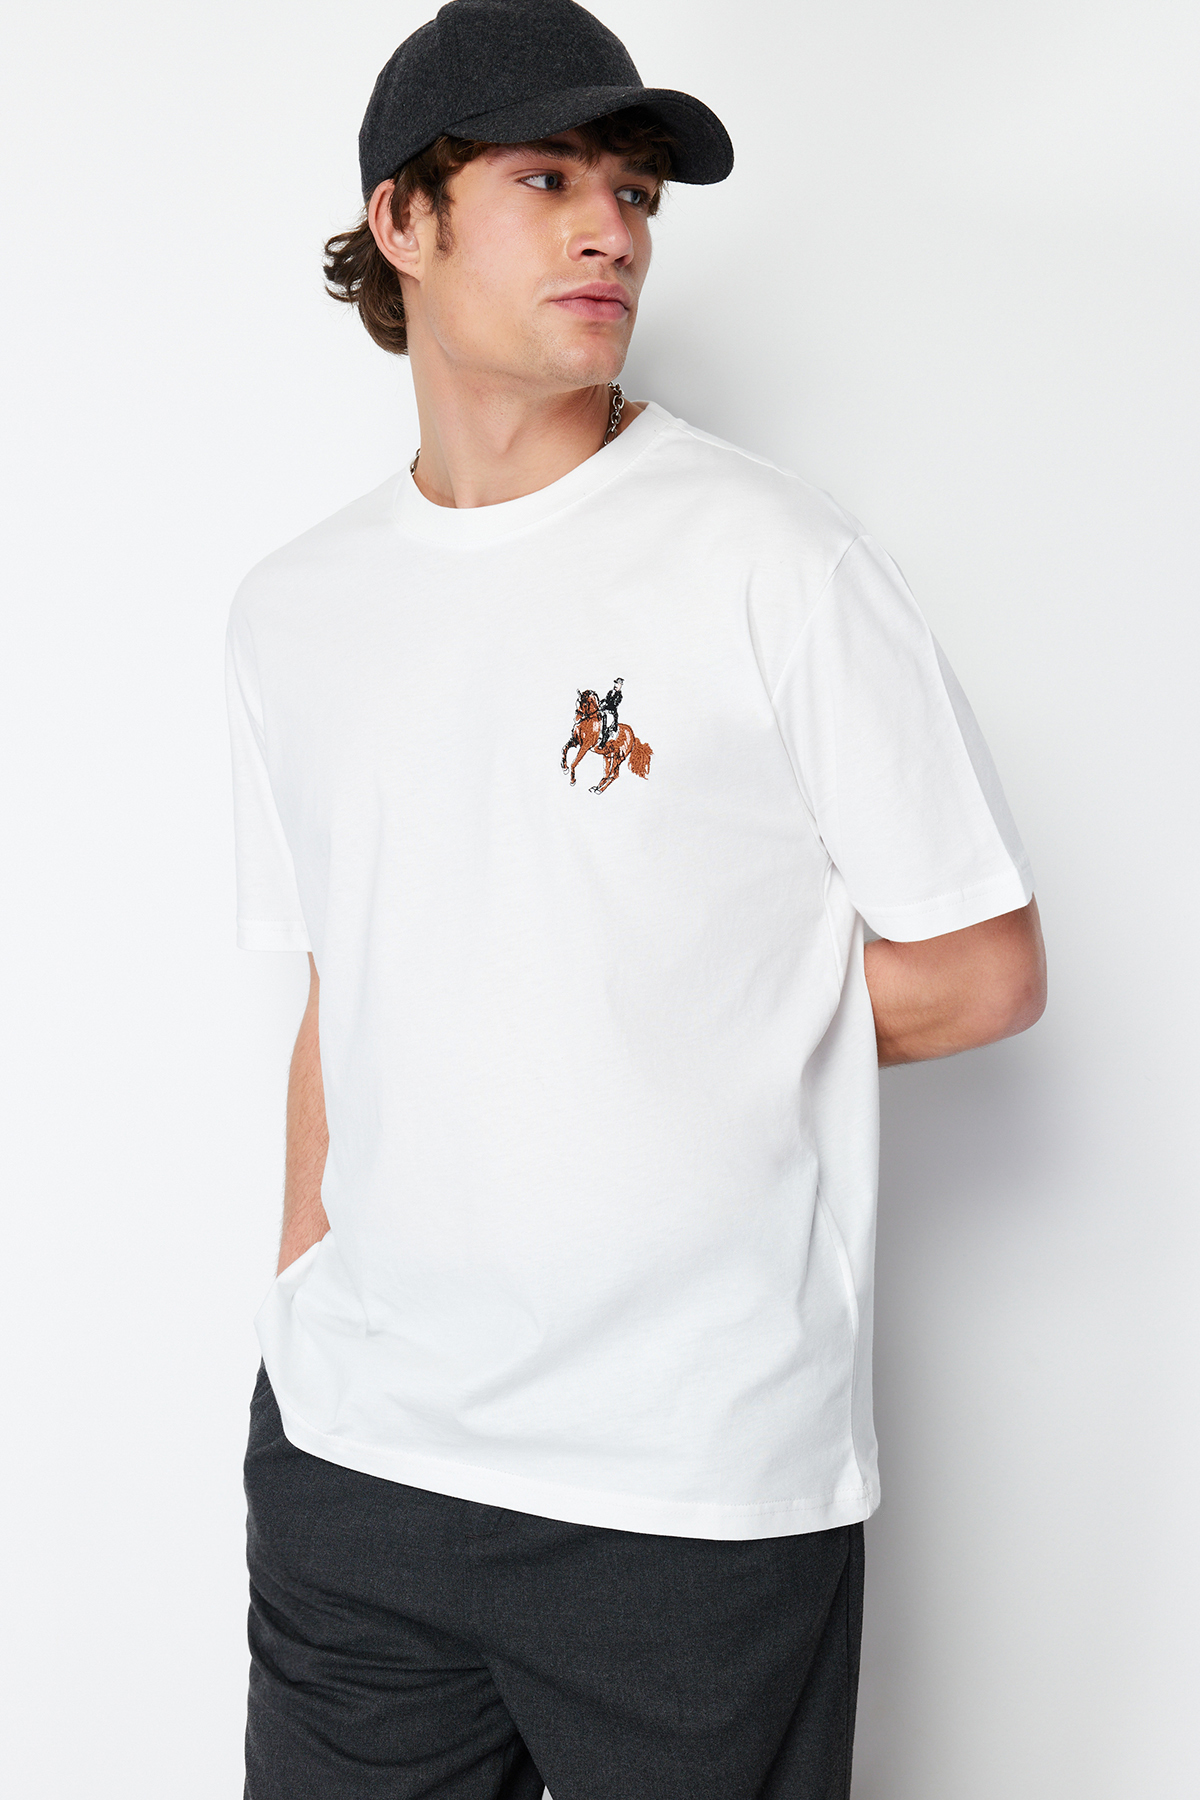 Trendyol Ecru Relaxed/Casual Fit Horse/Animal Embroidered Short Sleeve 100% Cotton T-Shirt